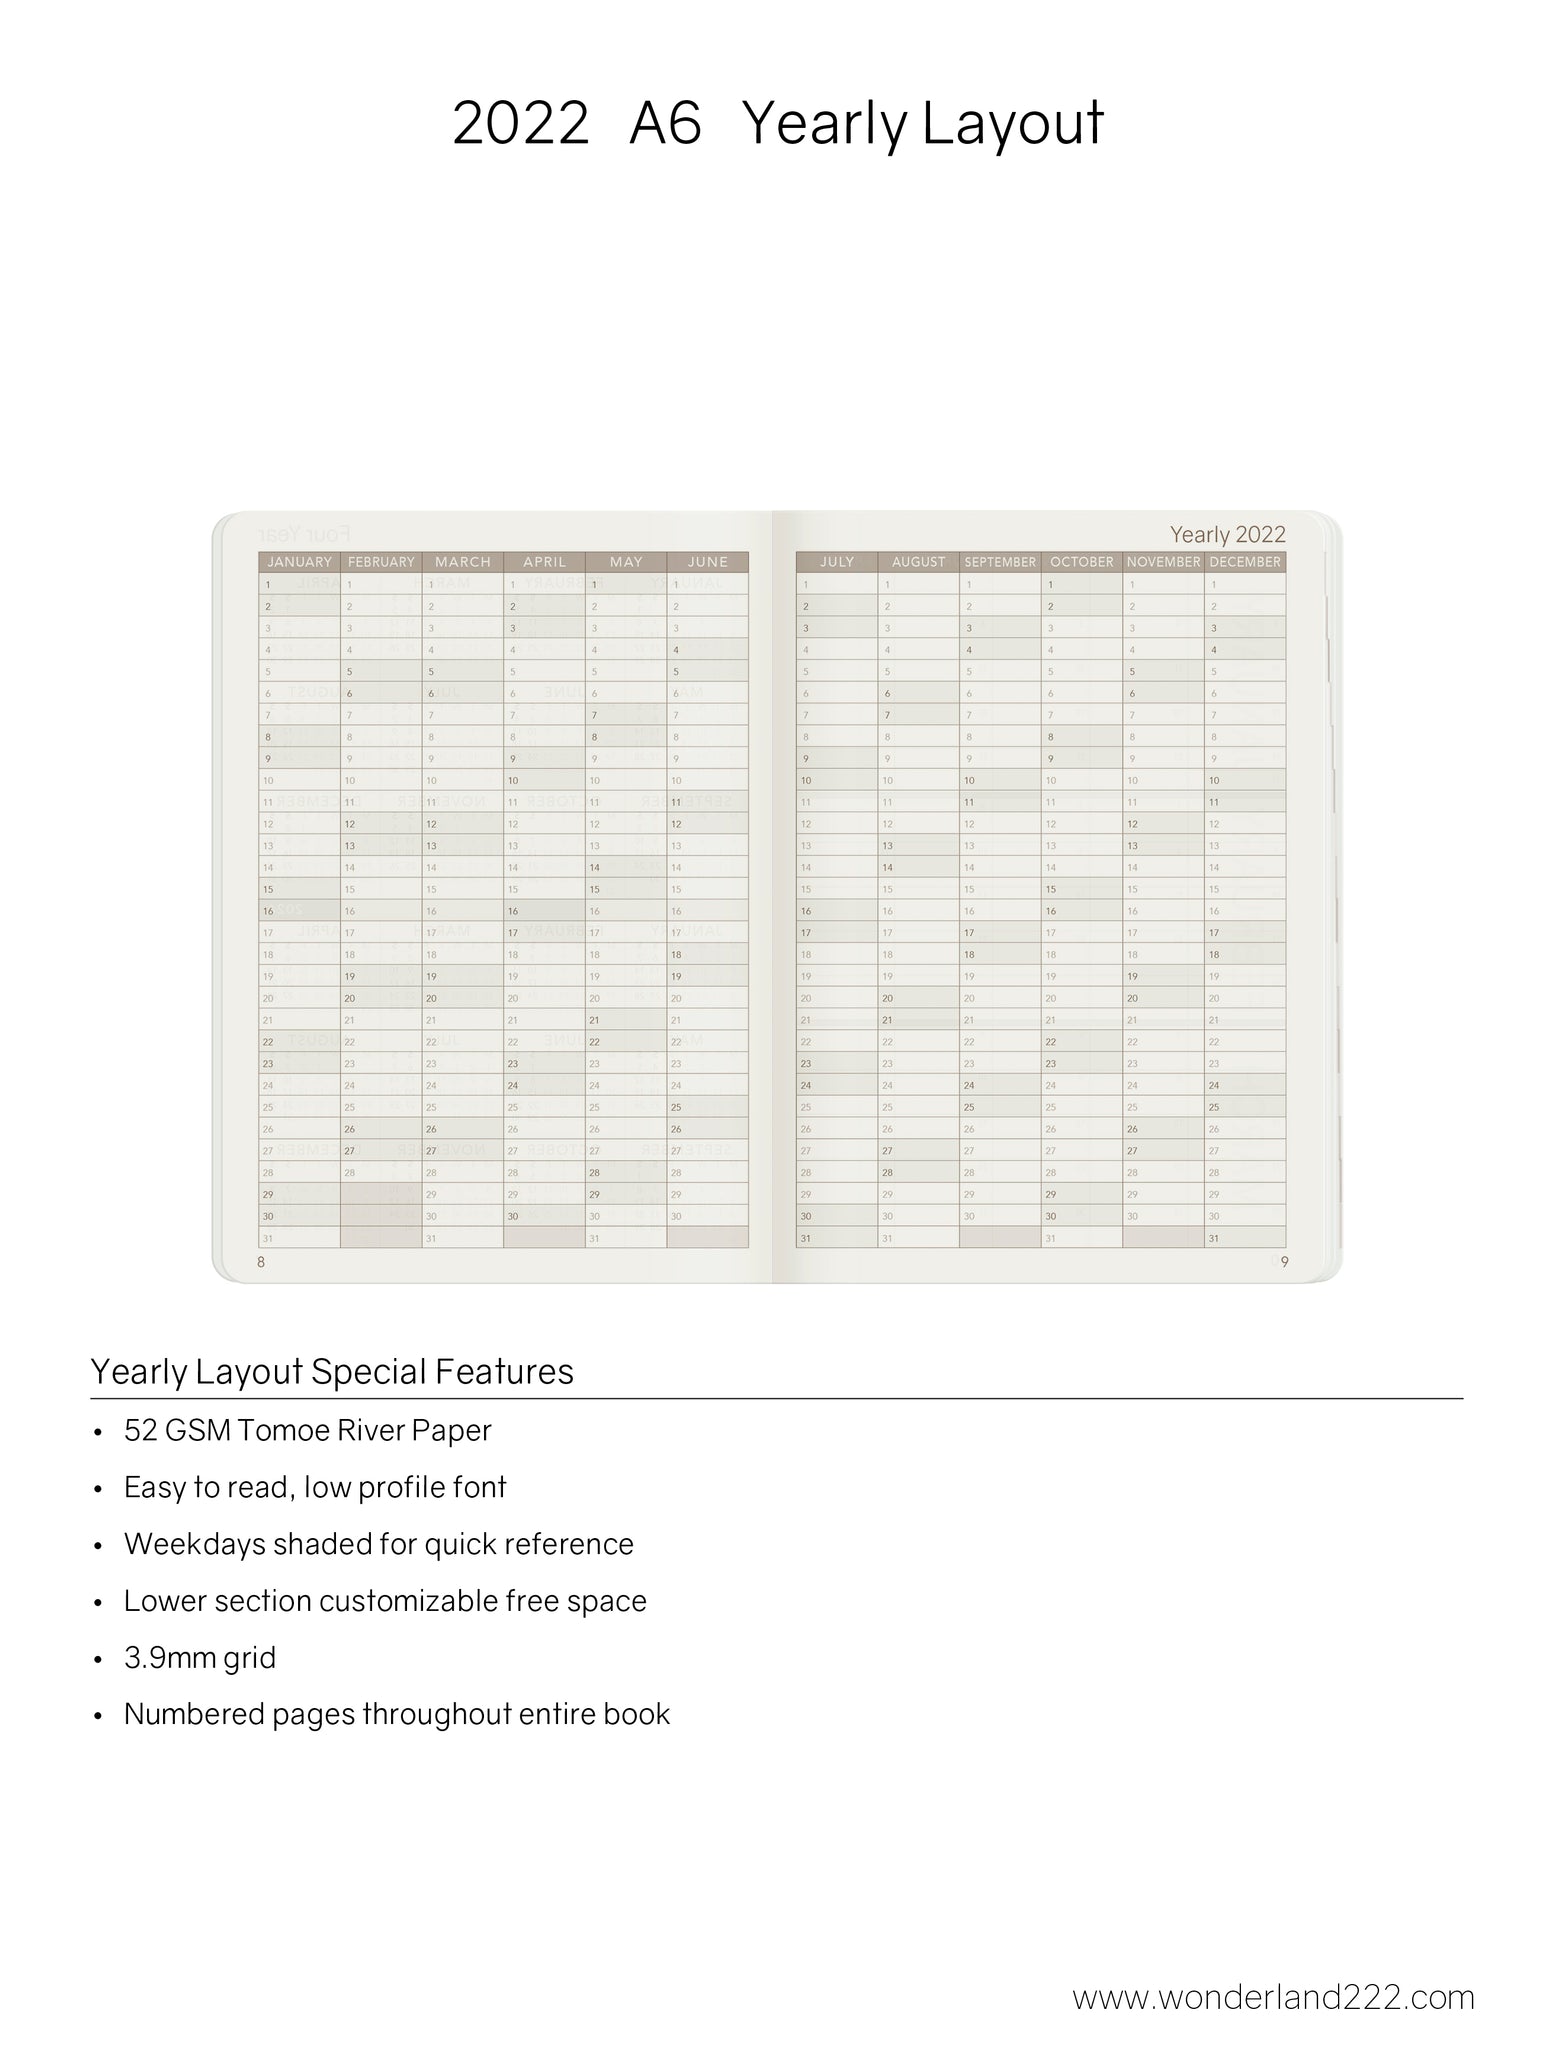 Overstock Sale! - A6 2022 Weekly Planner - 52gsm Tomoe River Paper